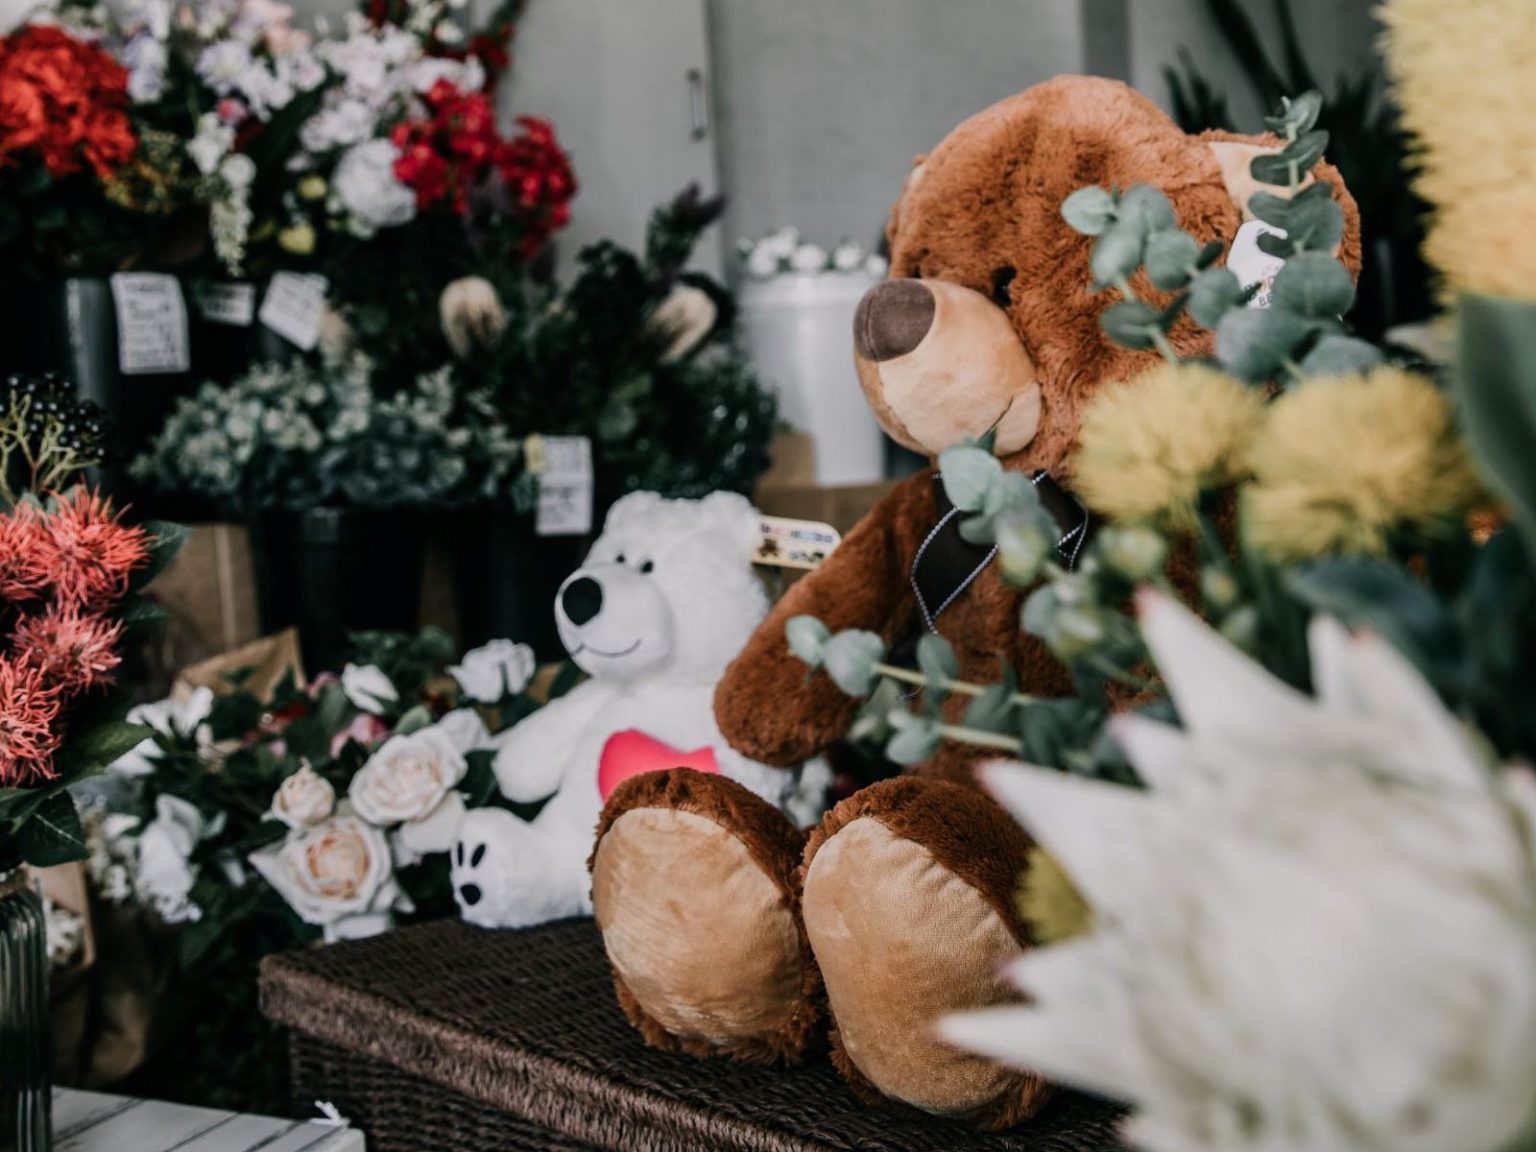 Image of teddy bears and flowers